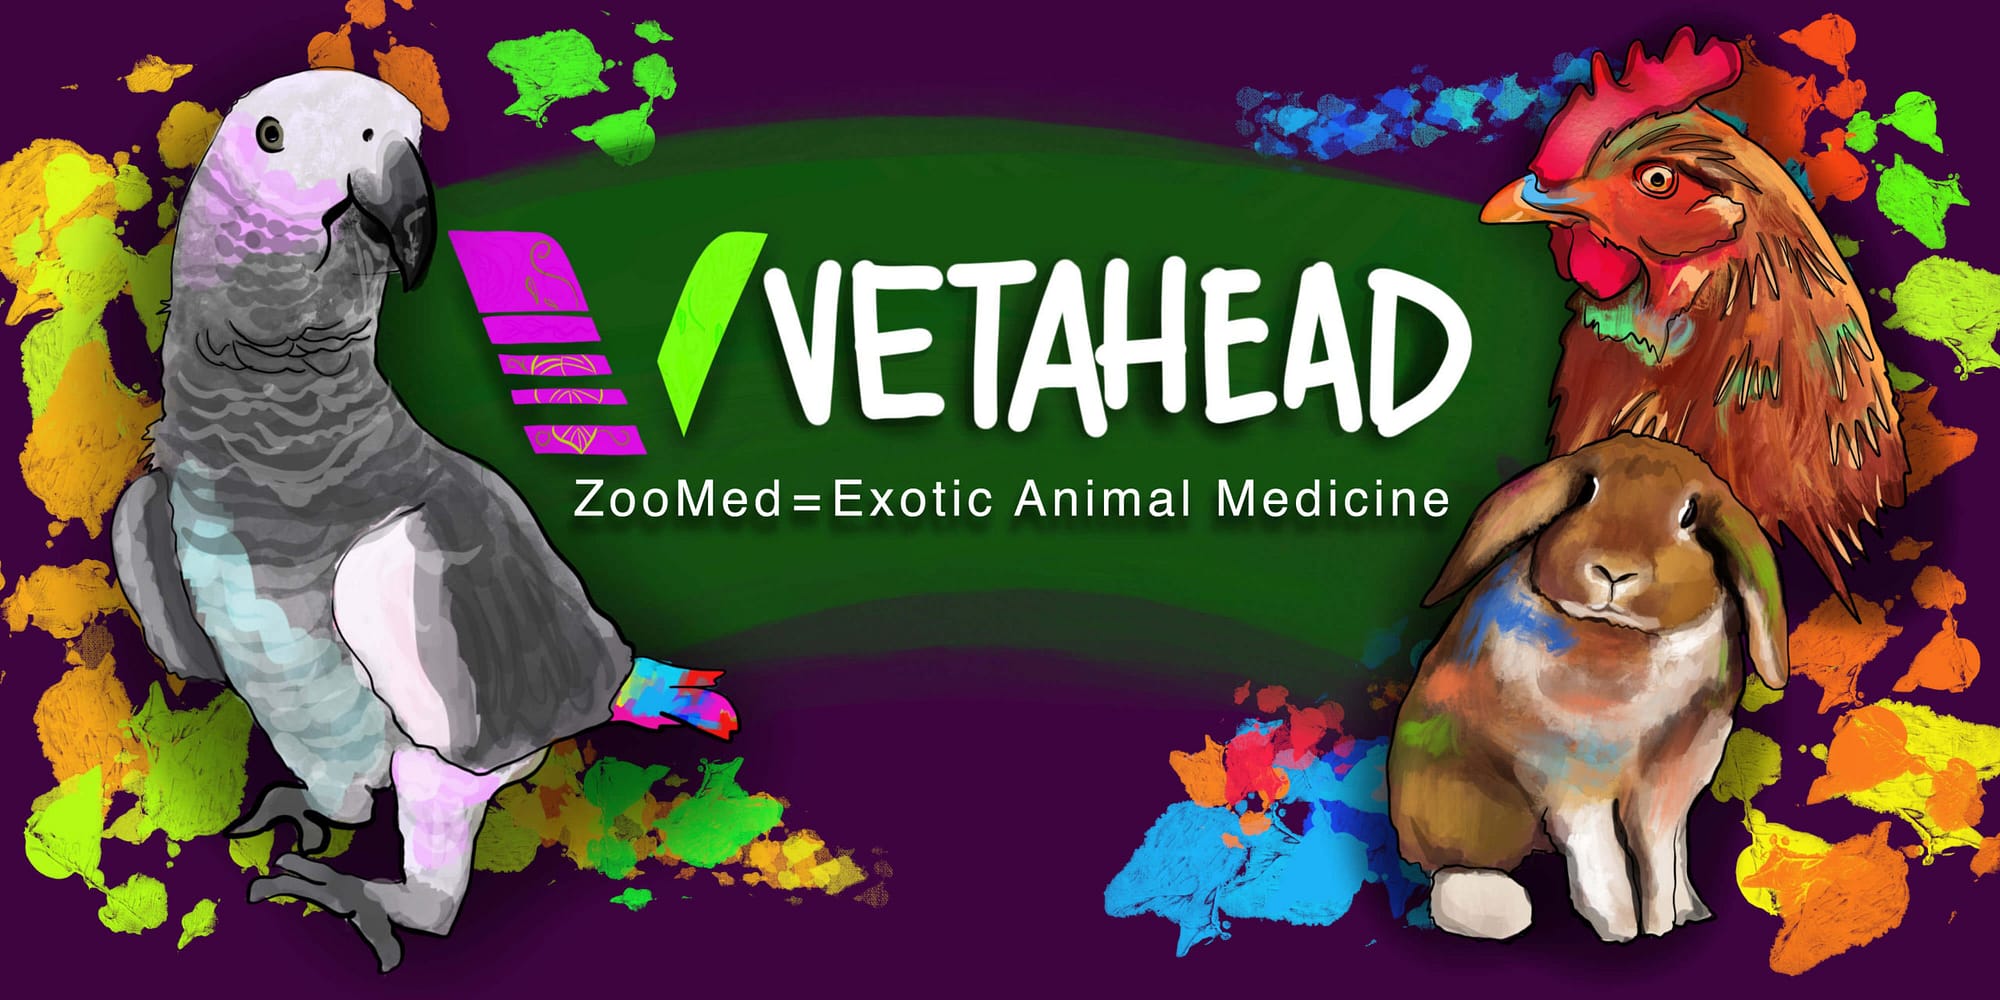 ABOUT – VetAhead